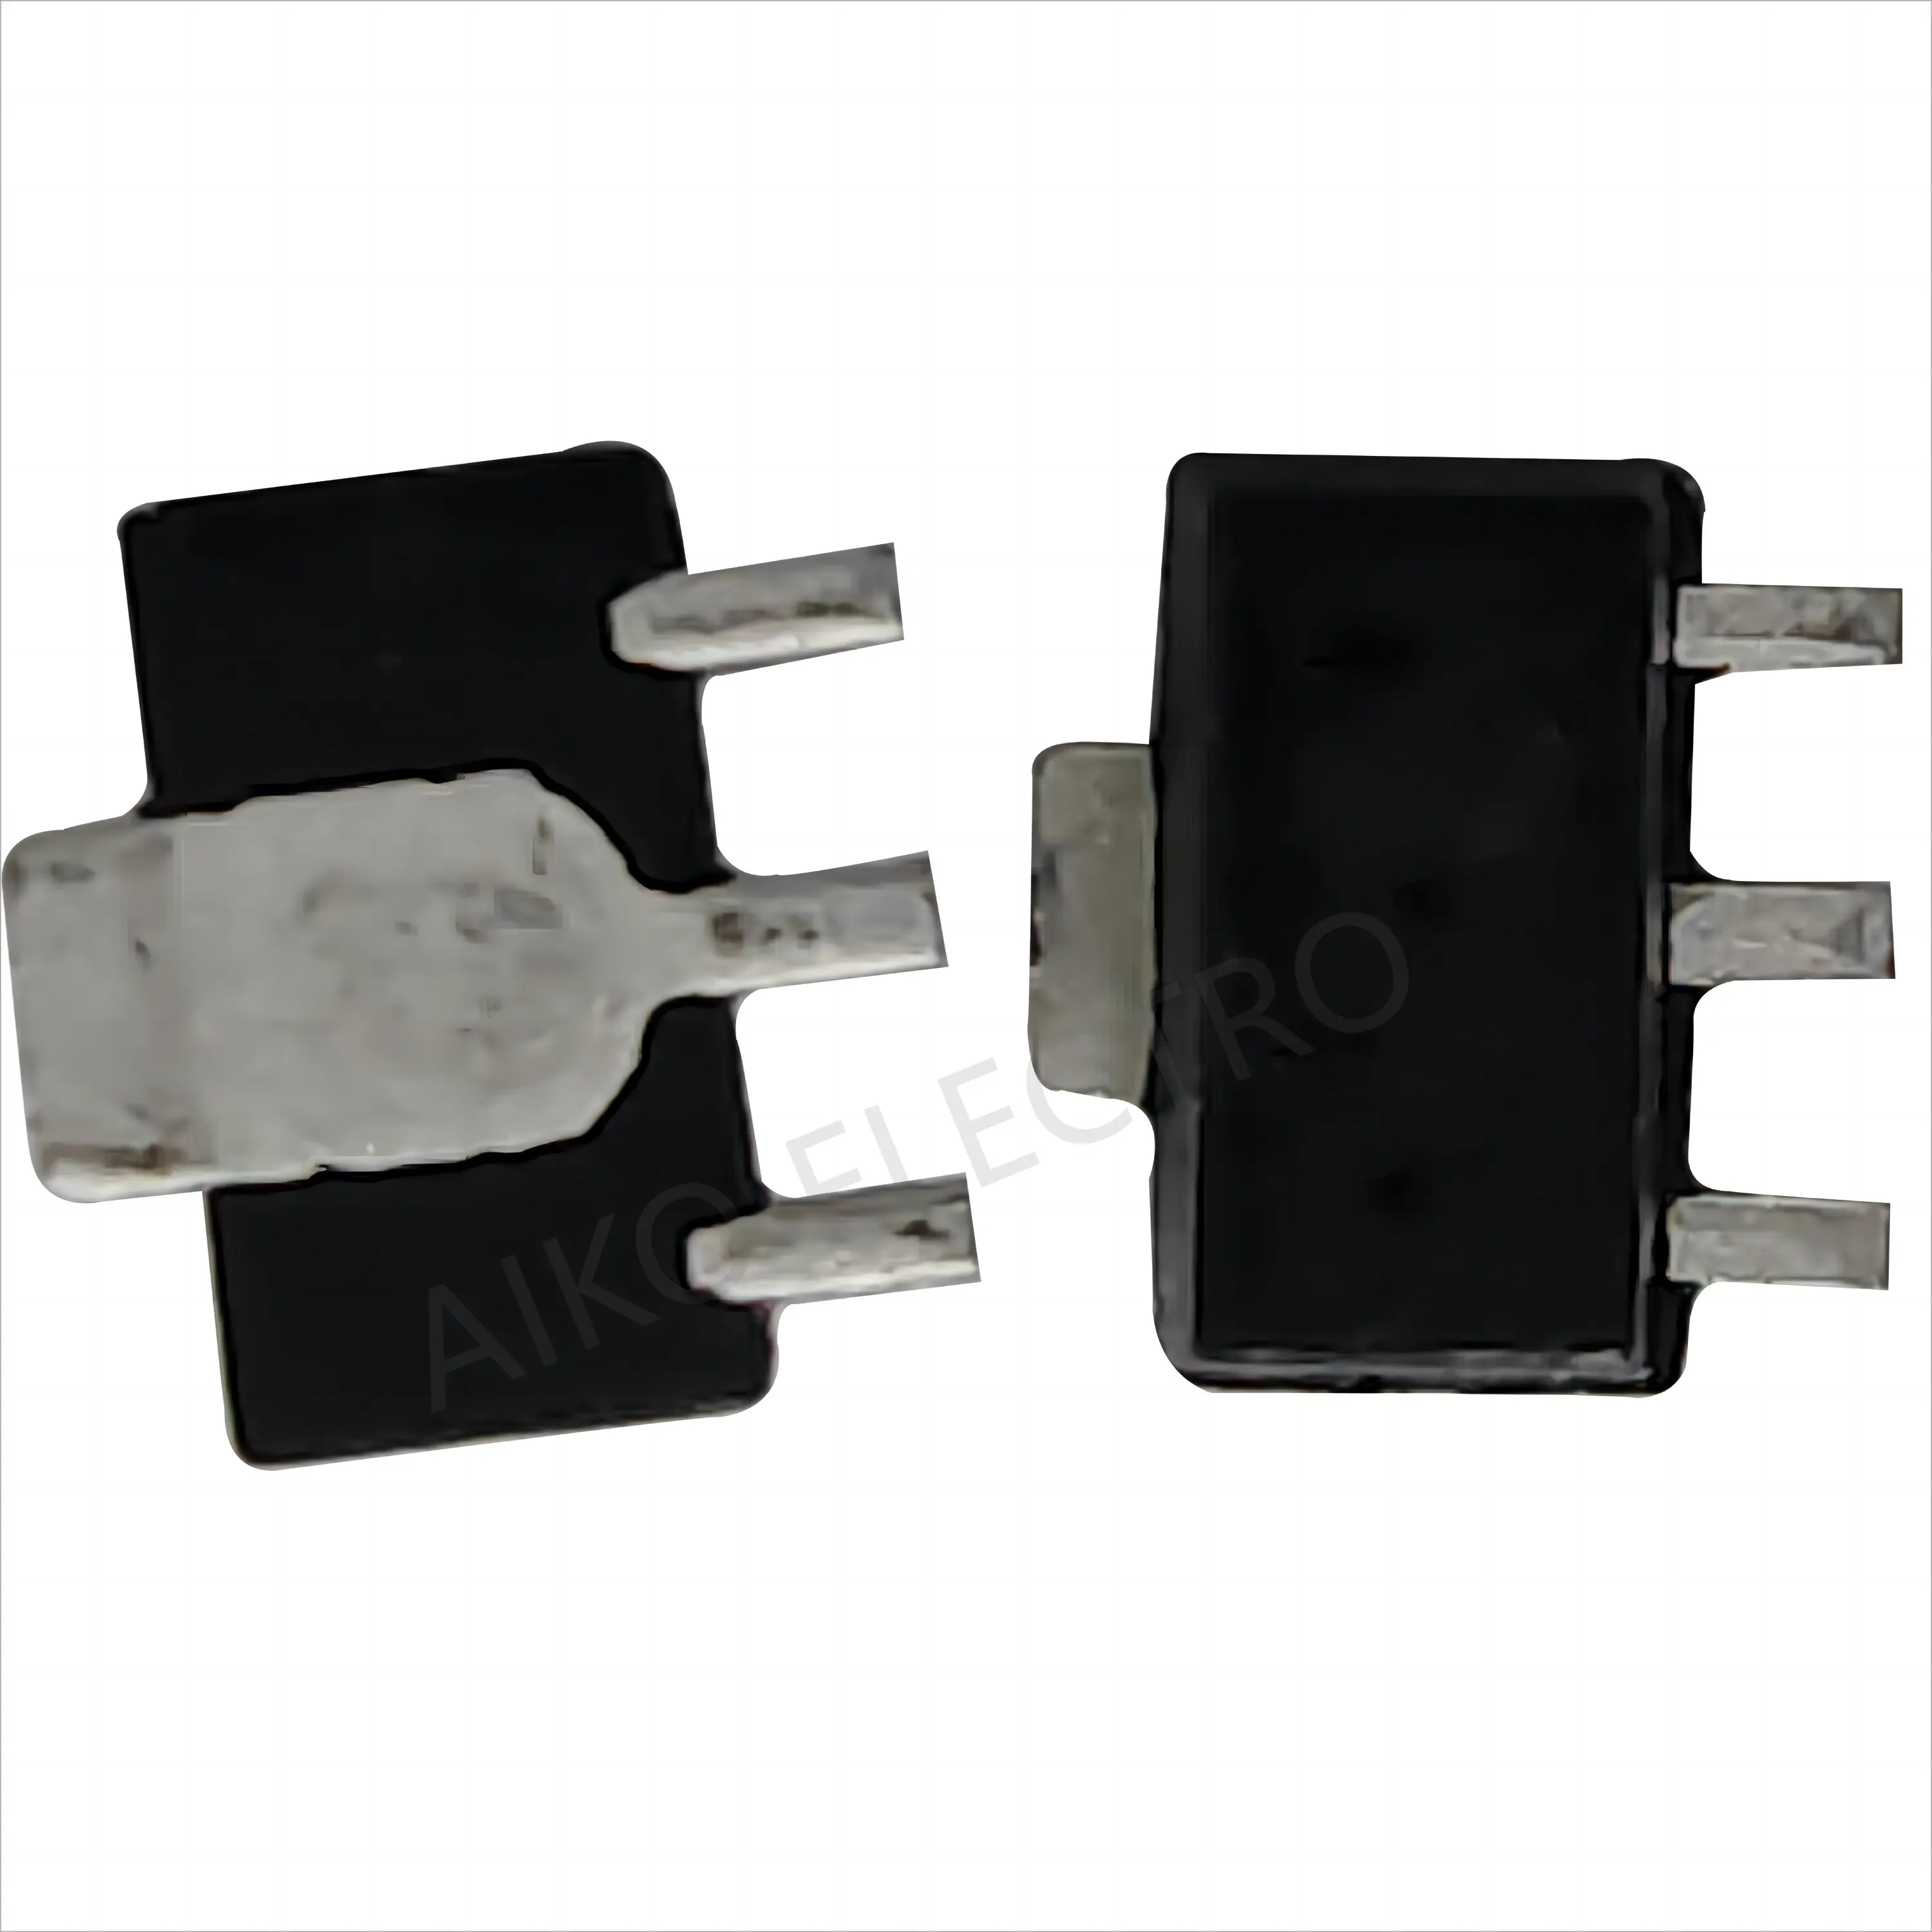 New Original BT169 Serial 0.8A Thyristor SCRs 600V For Overvoltage Crowbar Protection in Low Power Supplies